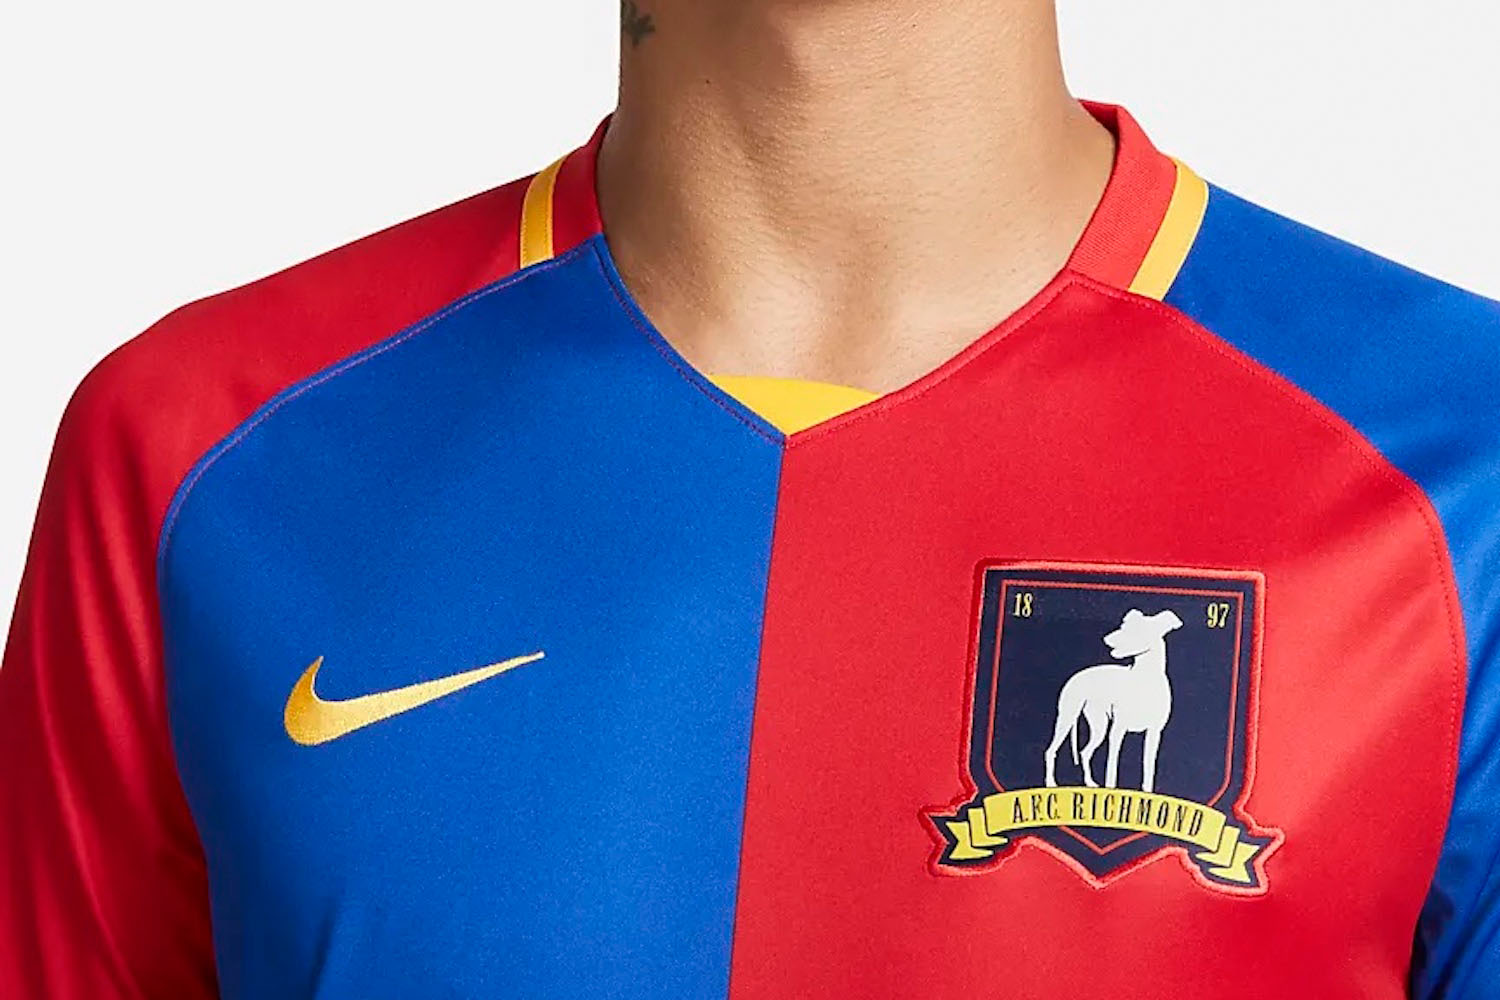 a close-up of the Nike AFC Richmond Jersey